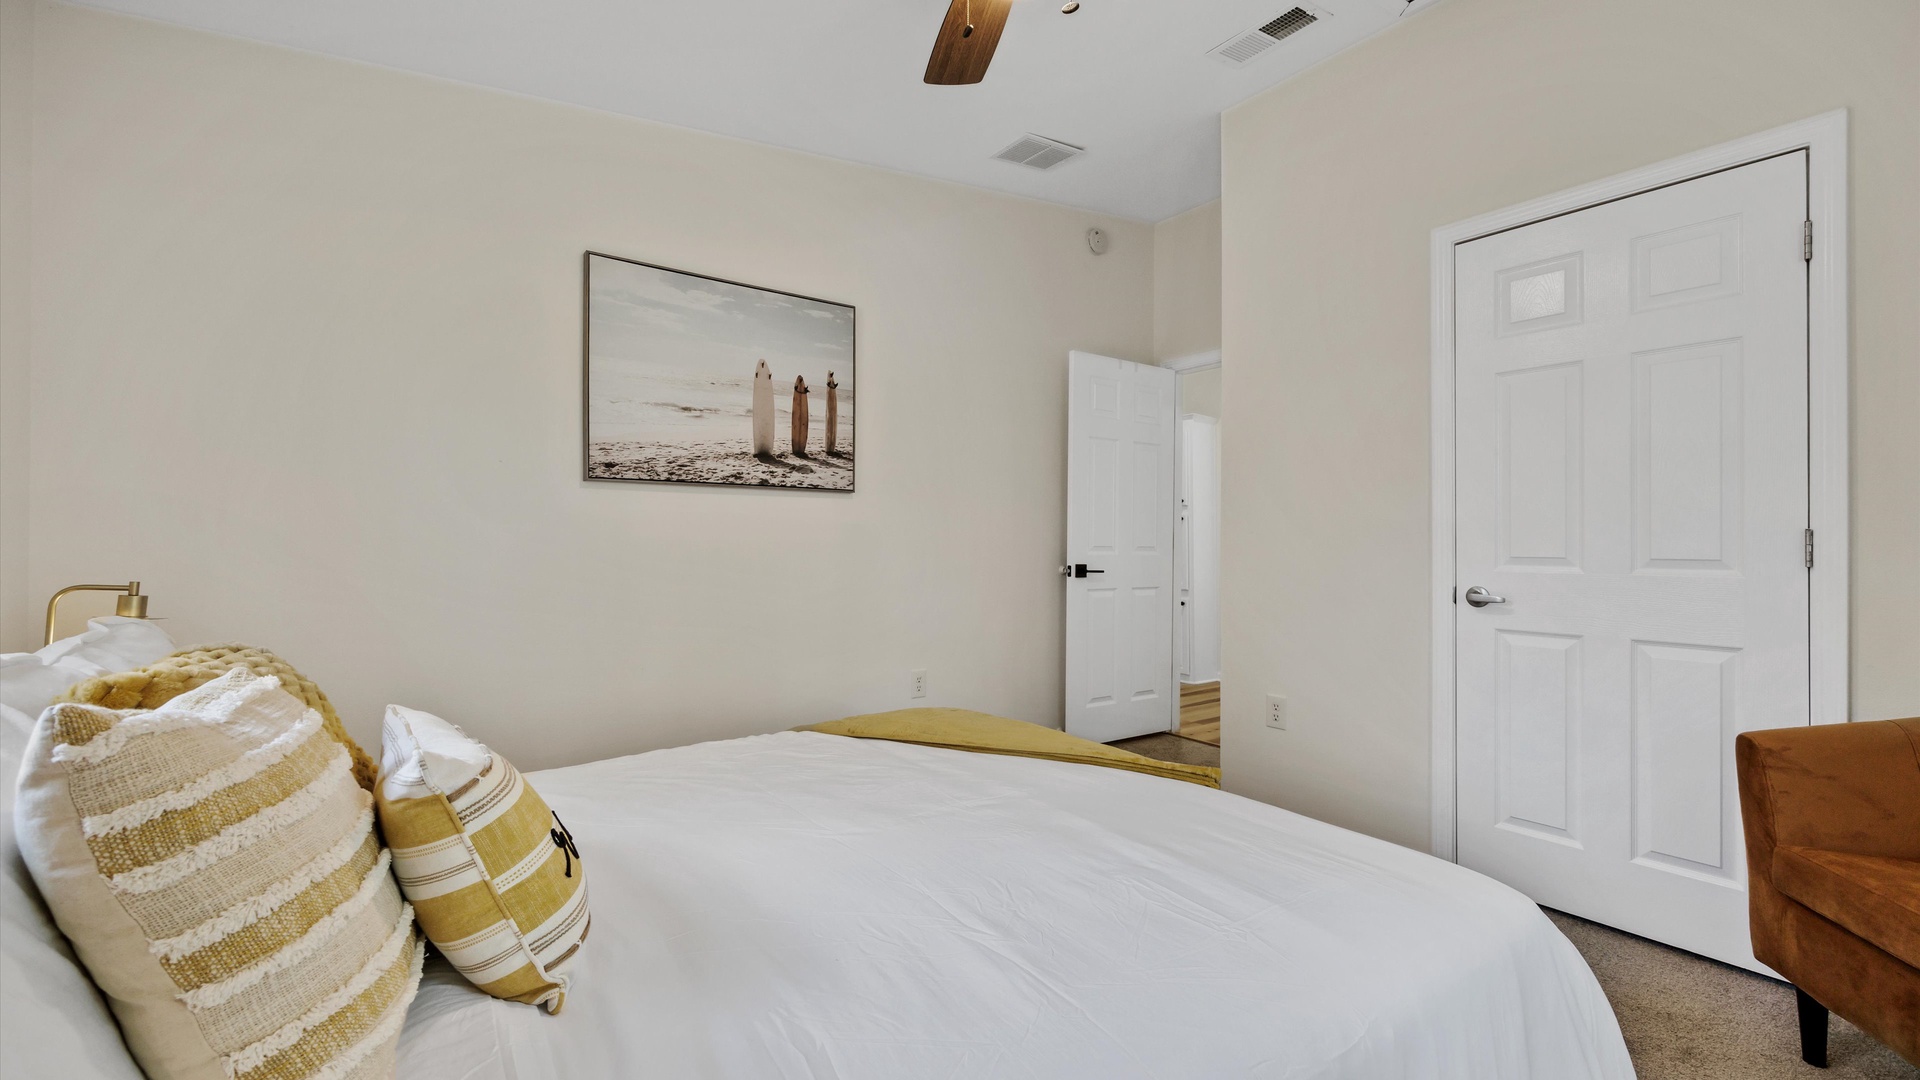 The second bedroom includes a plush queen-sized bed & lounge chair